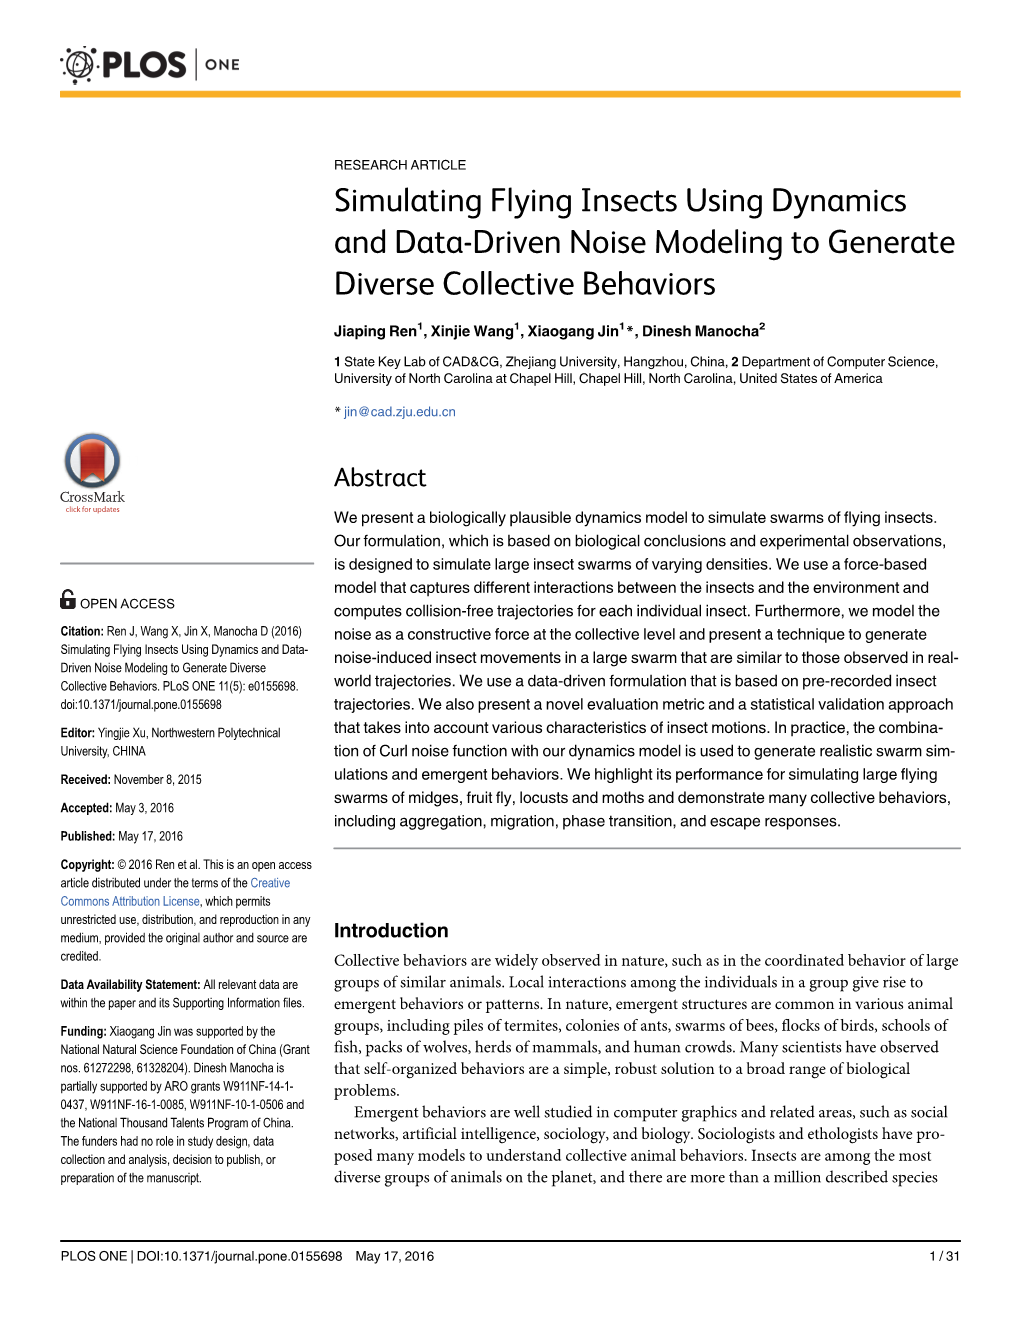 Simulating Flying Insects Using Dynamics and Data-Driven Noise Modeling to Generate Diverse Collective Behaviors